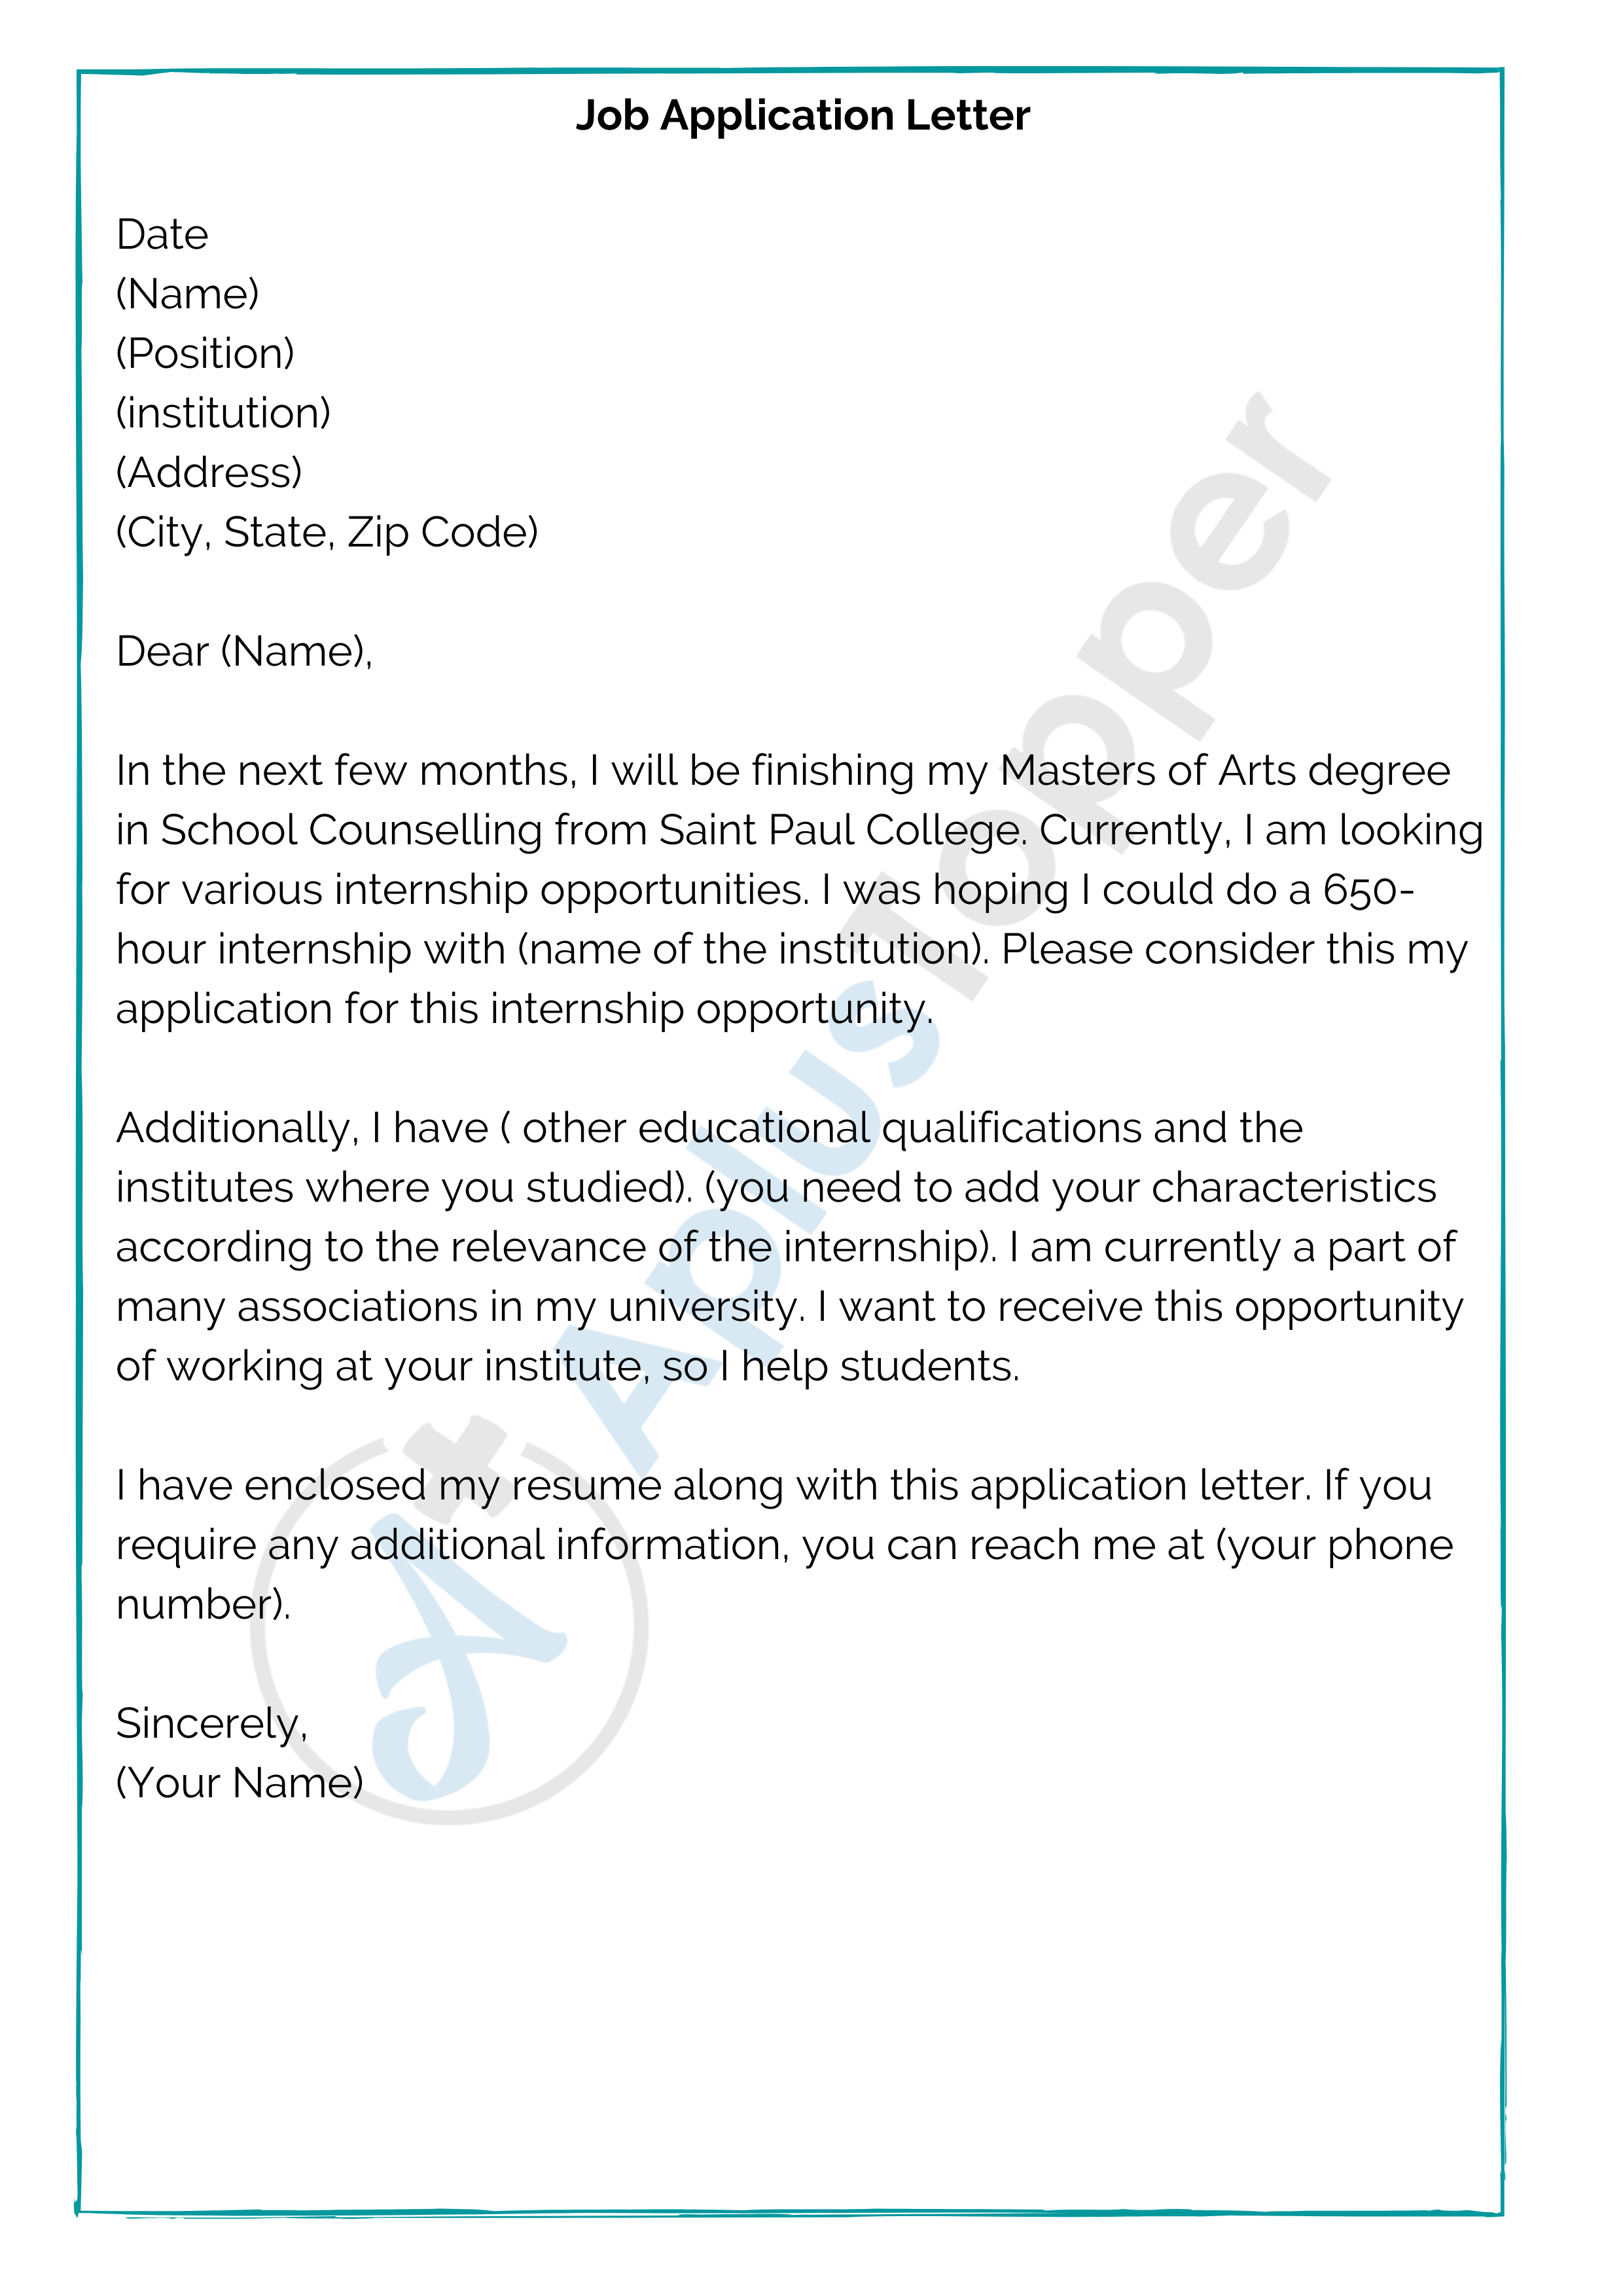 sample of application letter by email